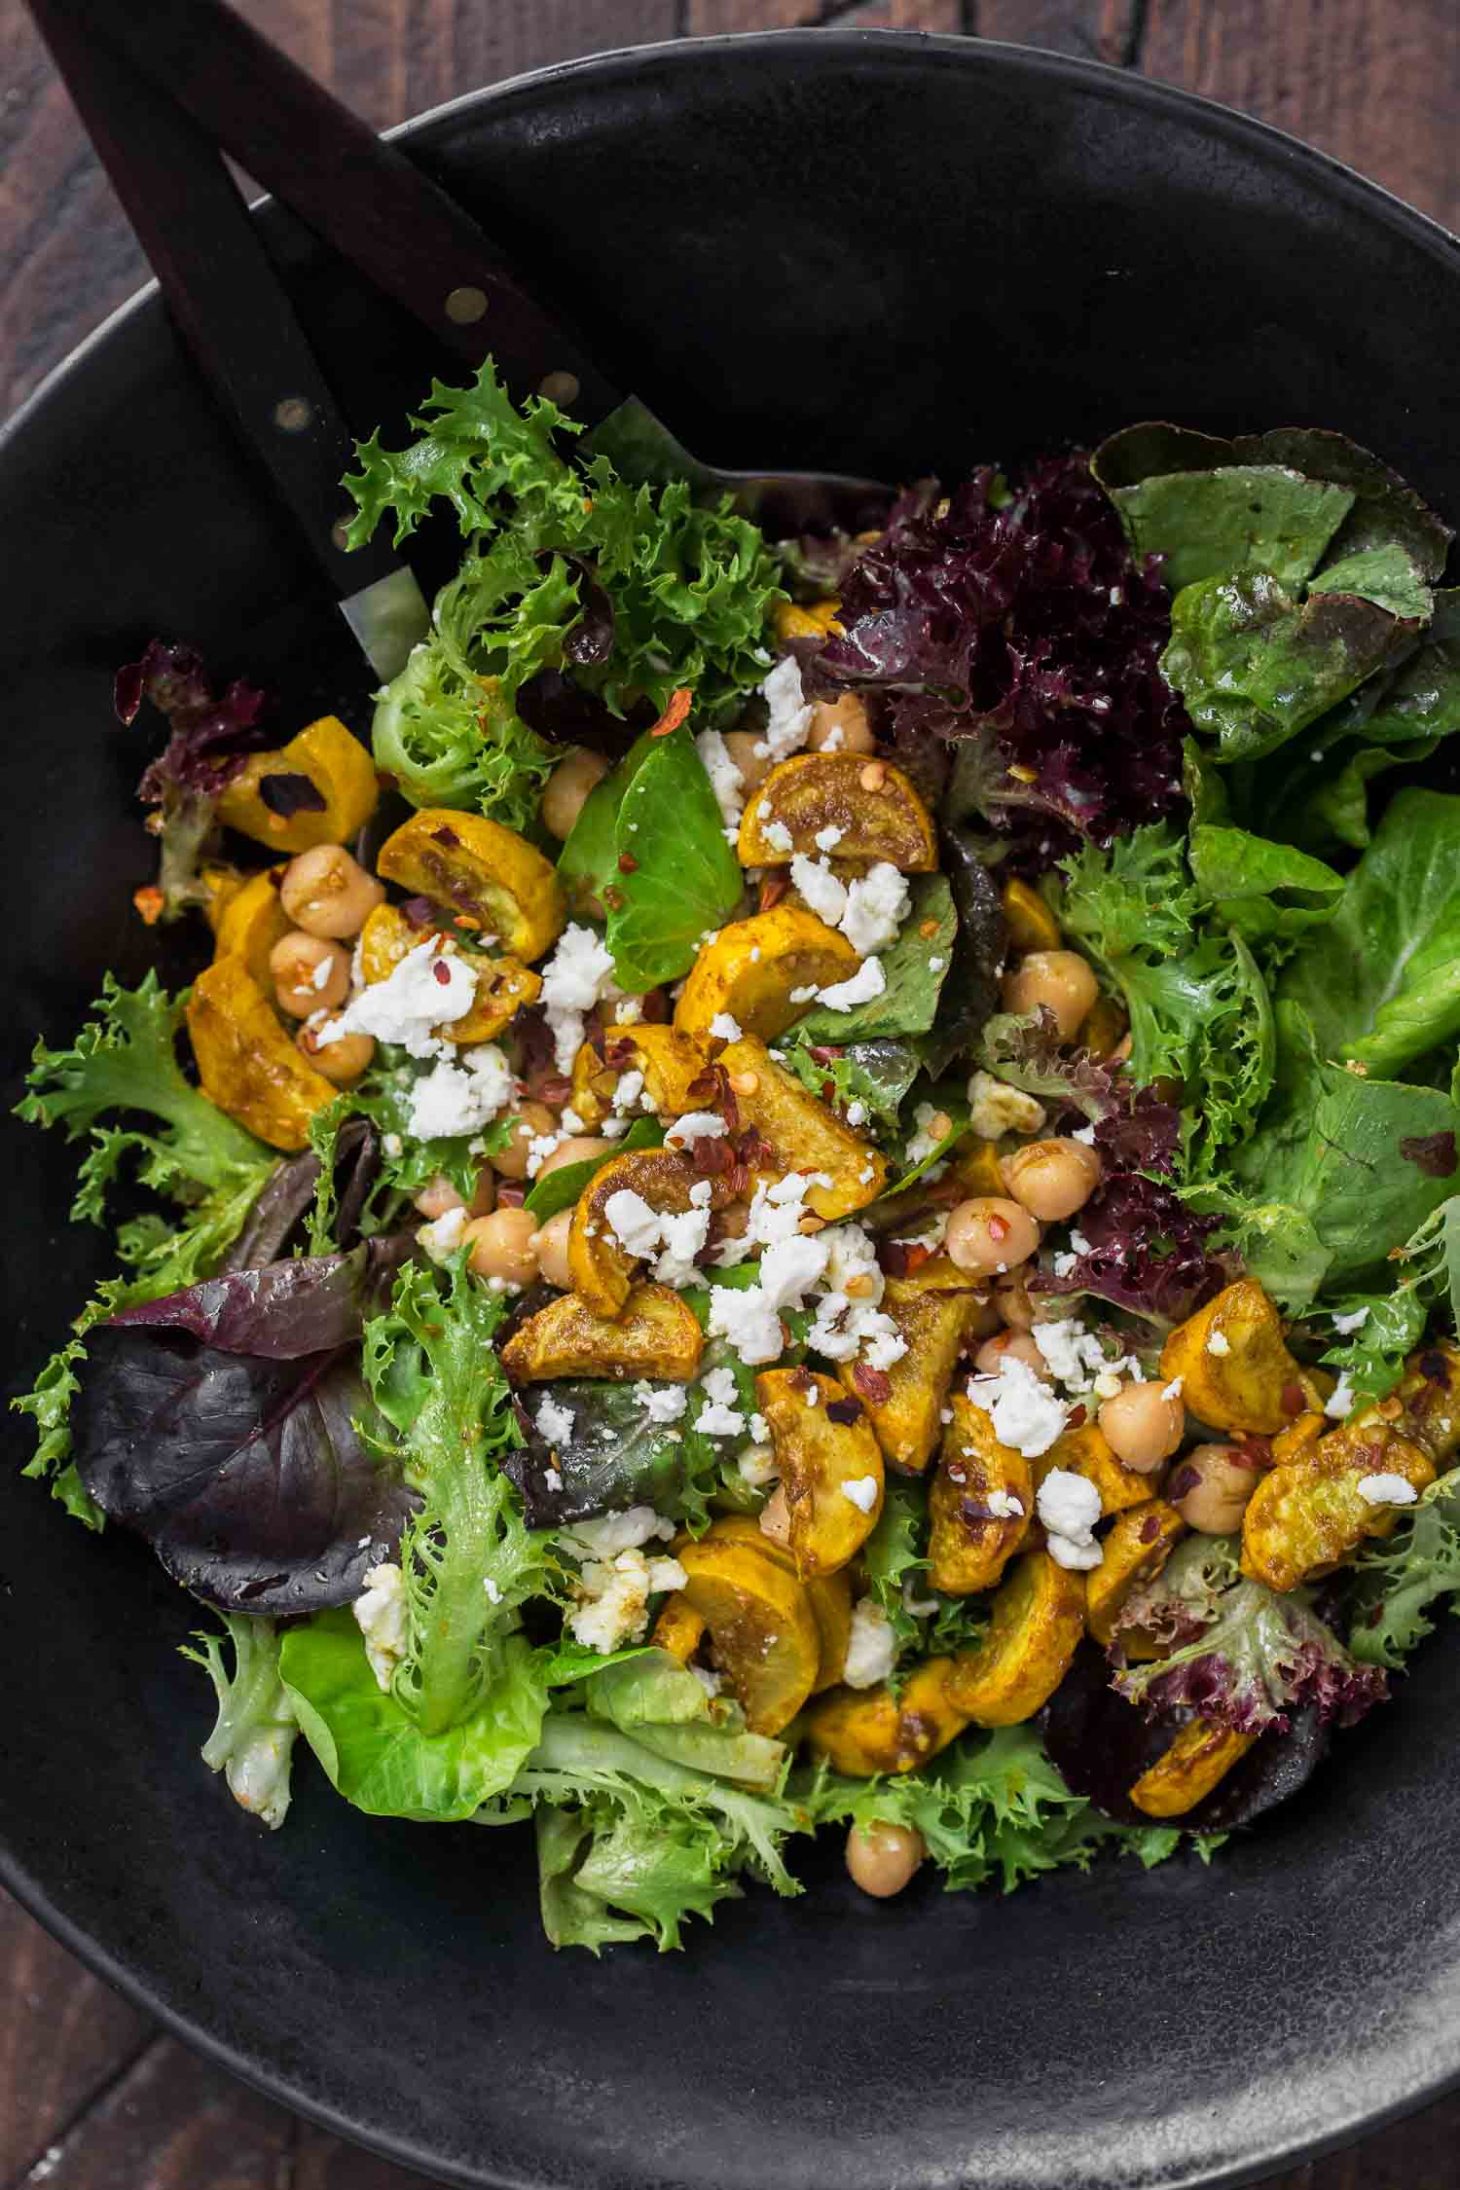 Spiced Yellow Squash Salad with Chickpeas | Naturally ella